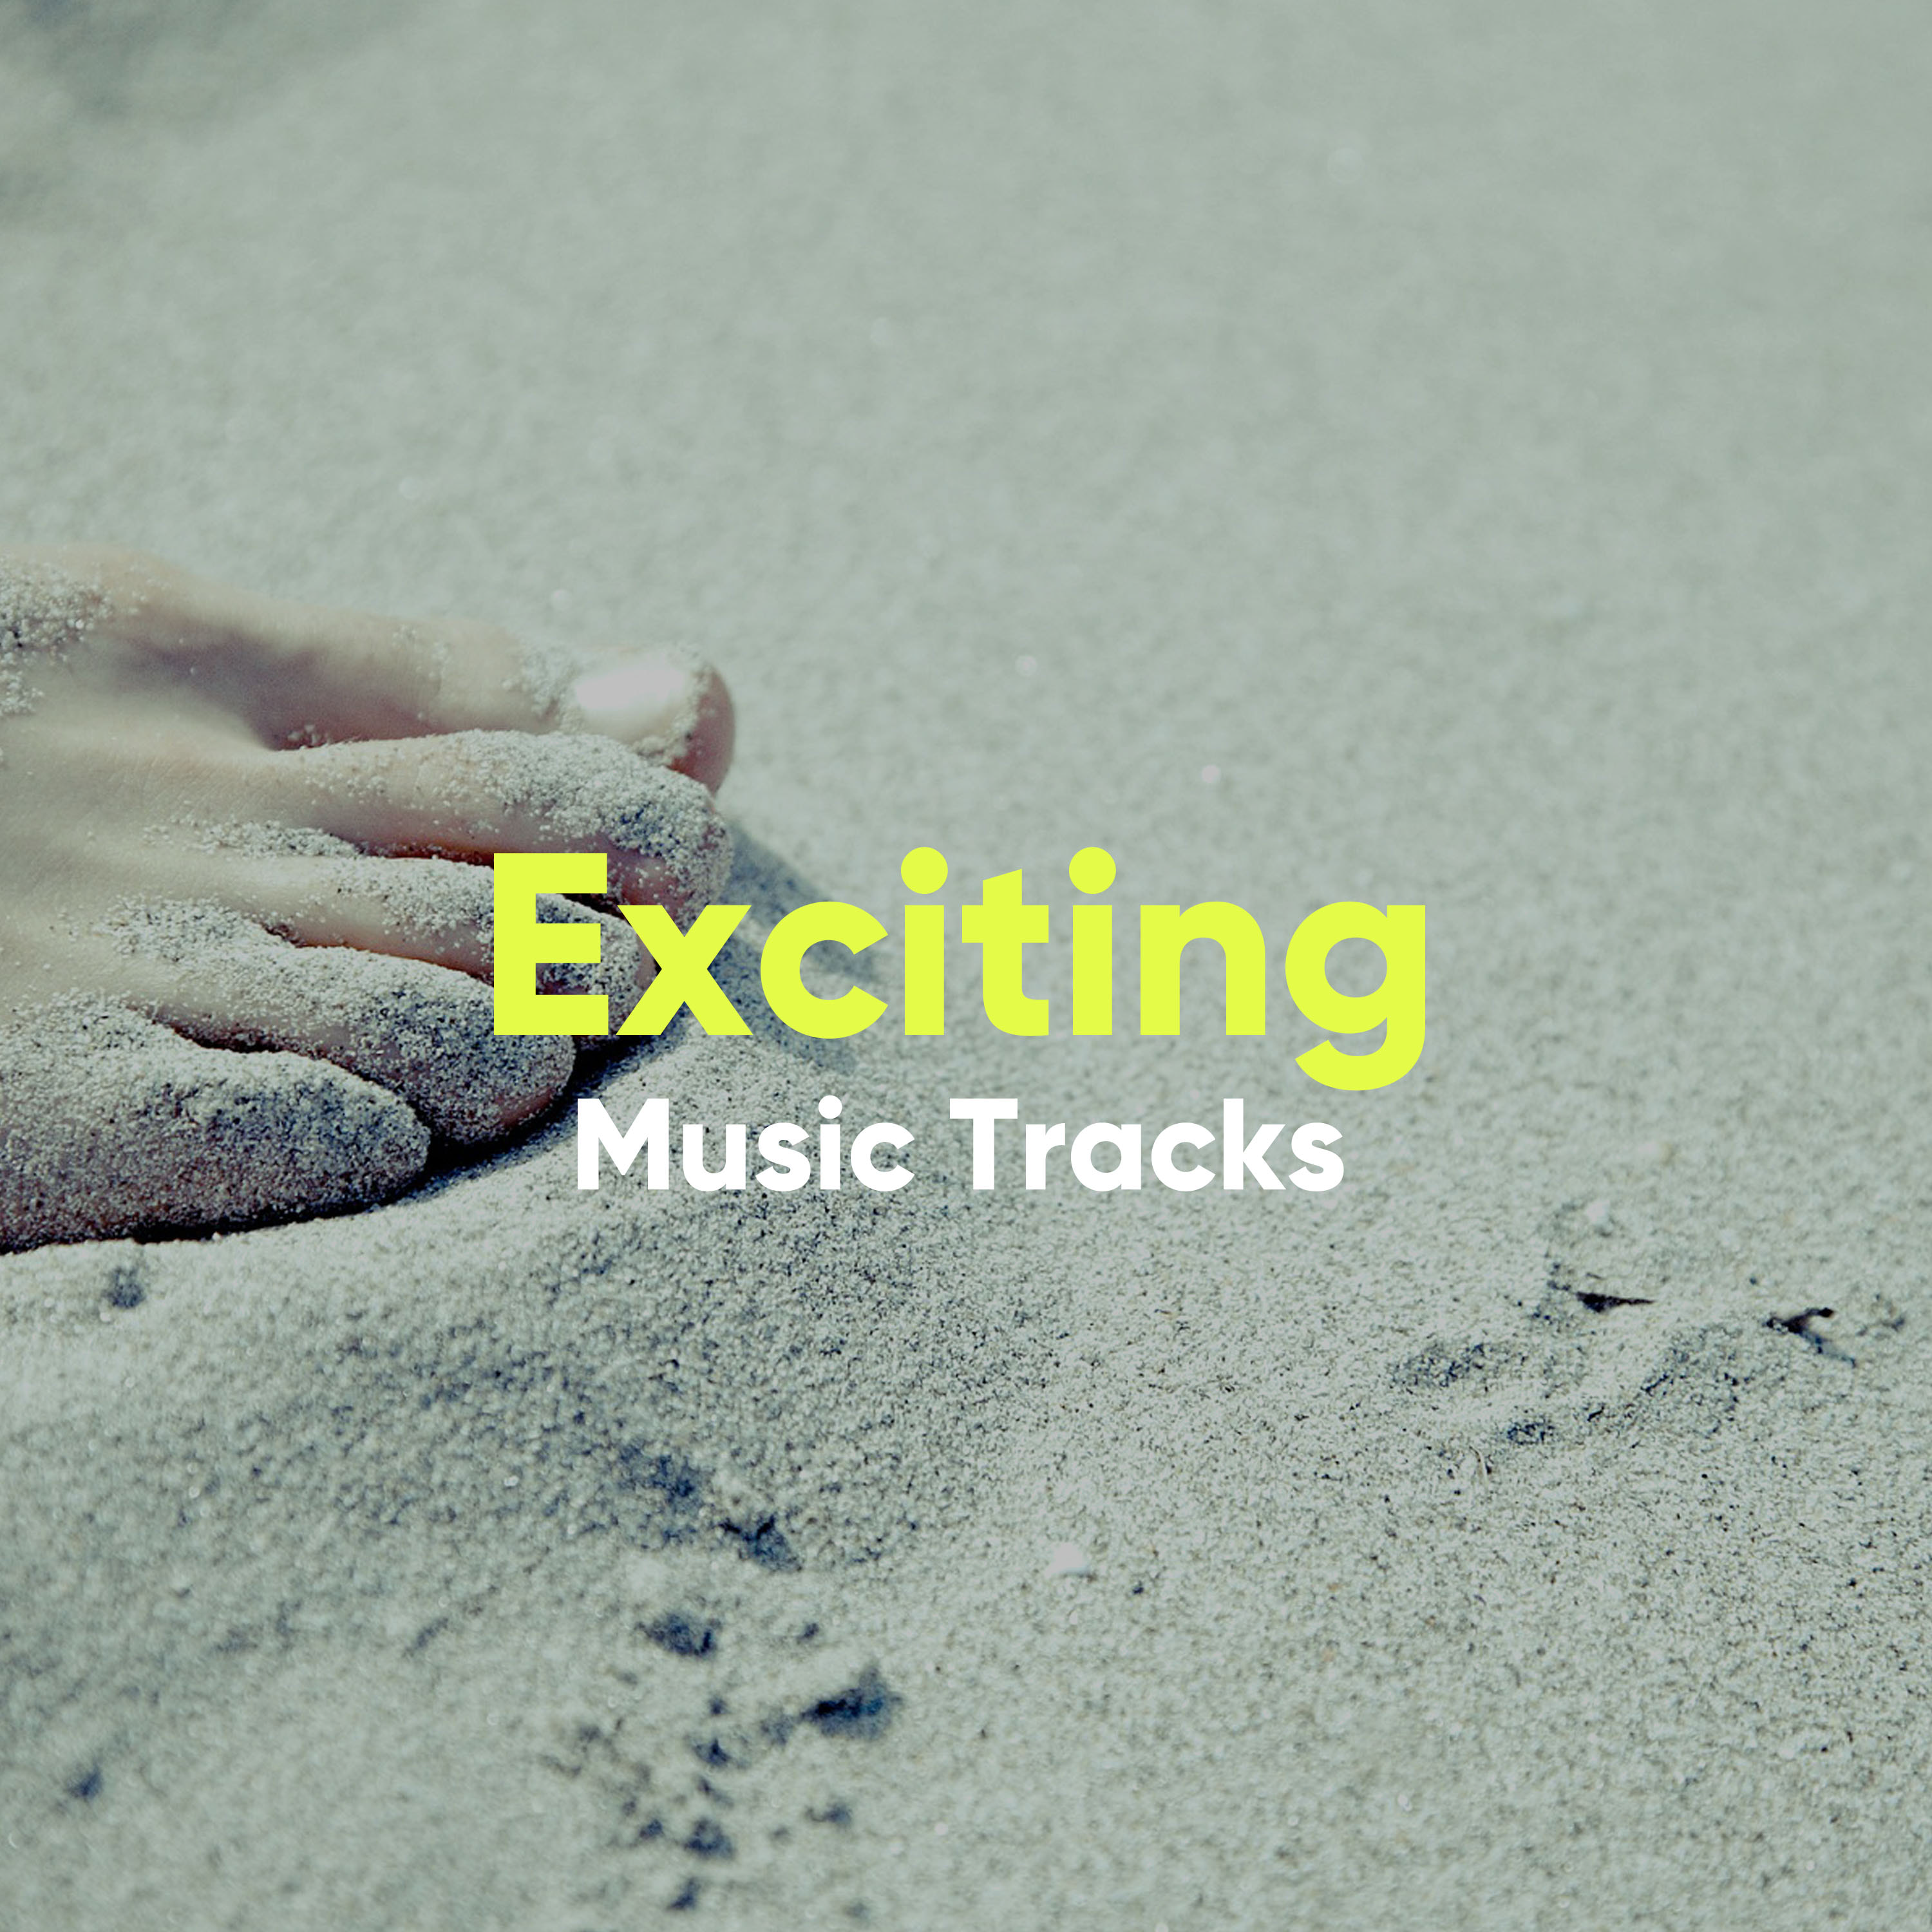 Exciting Music Tracks